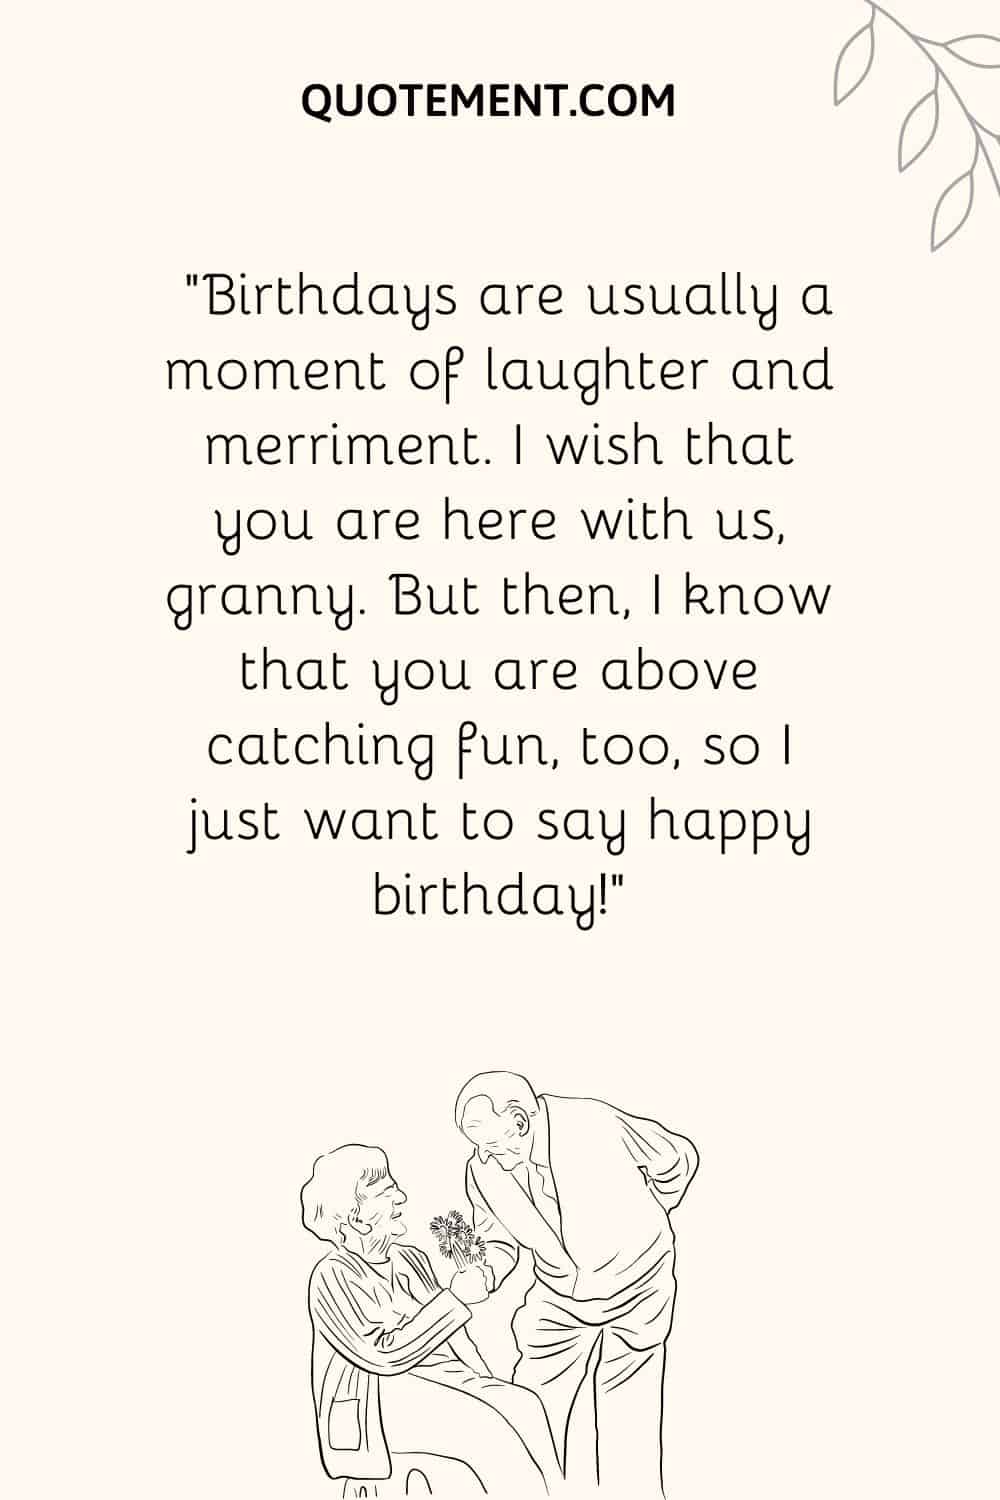 “Birthdays are usually a moment of laughter and merriment. I wish that you are here with us, granny. But then, I know that you are above catching fun, too, so I just want to say happy birthday!”